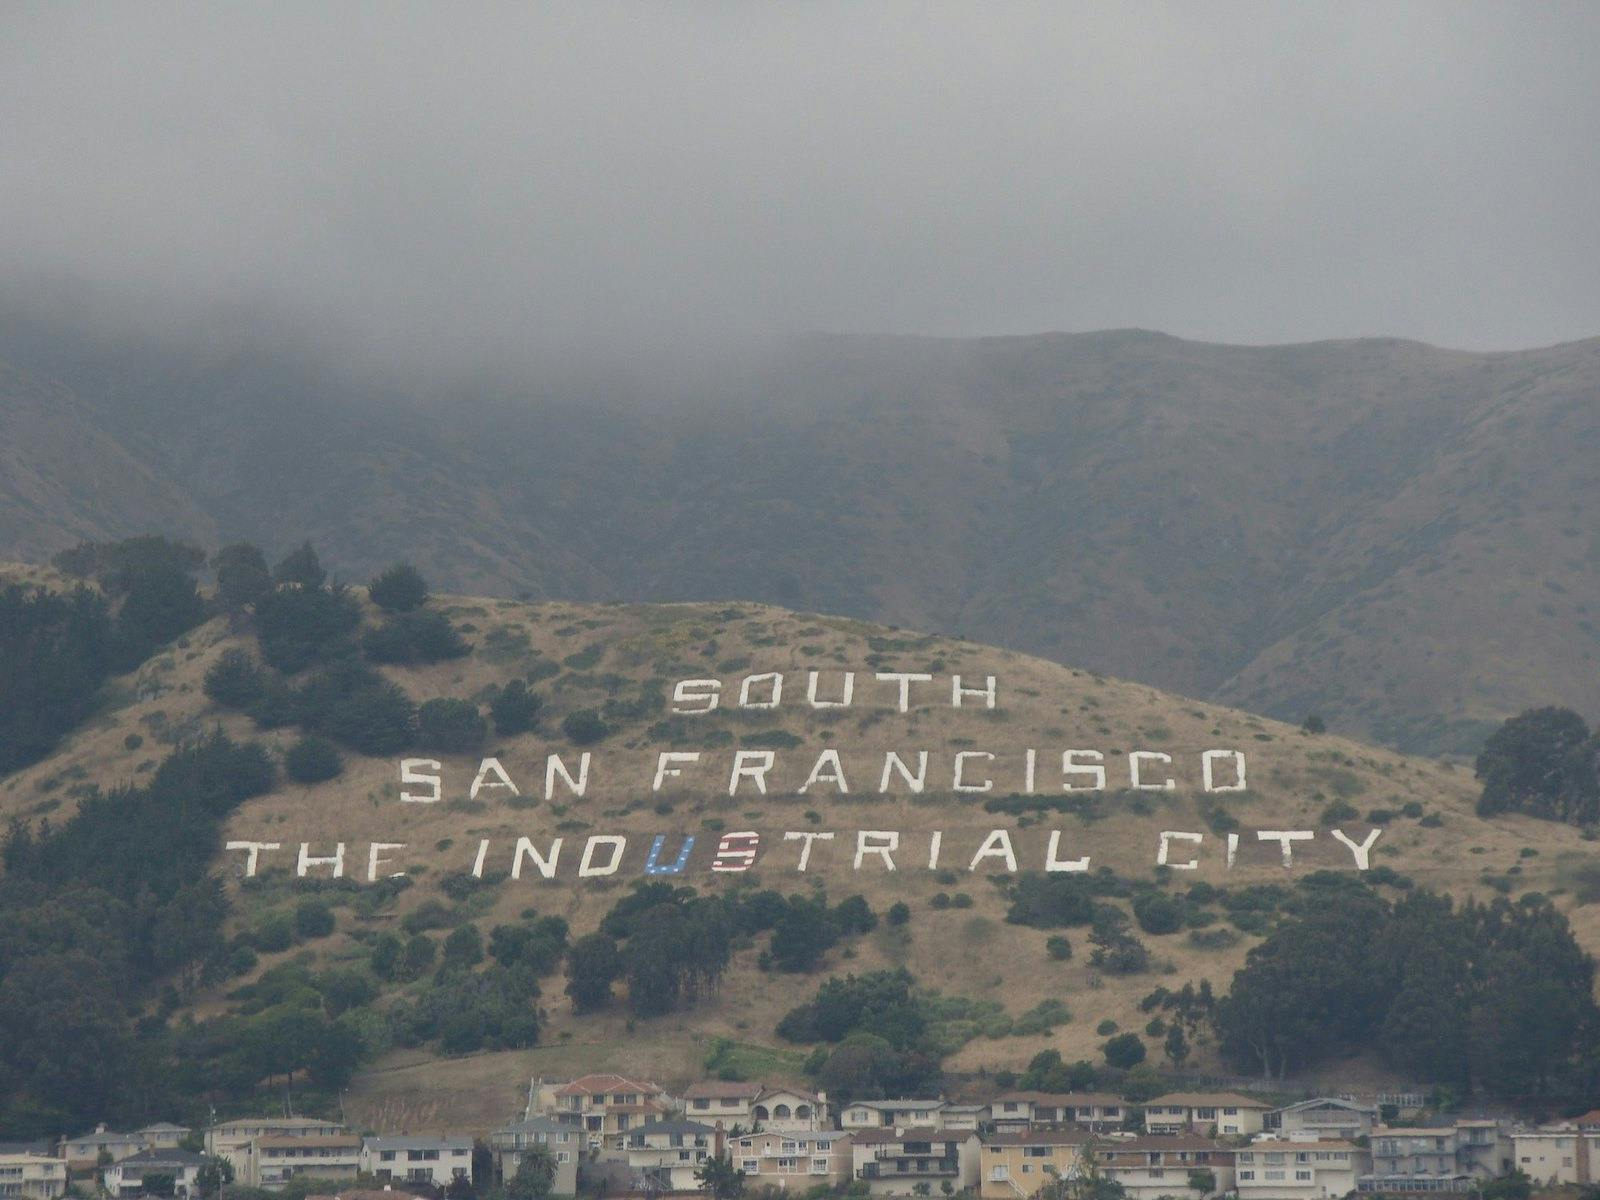 The Generational Political Divide in South San Francisco